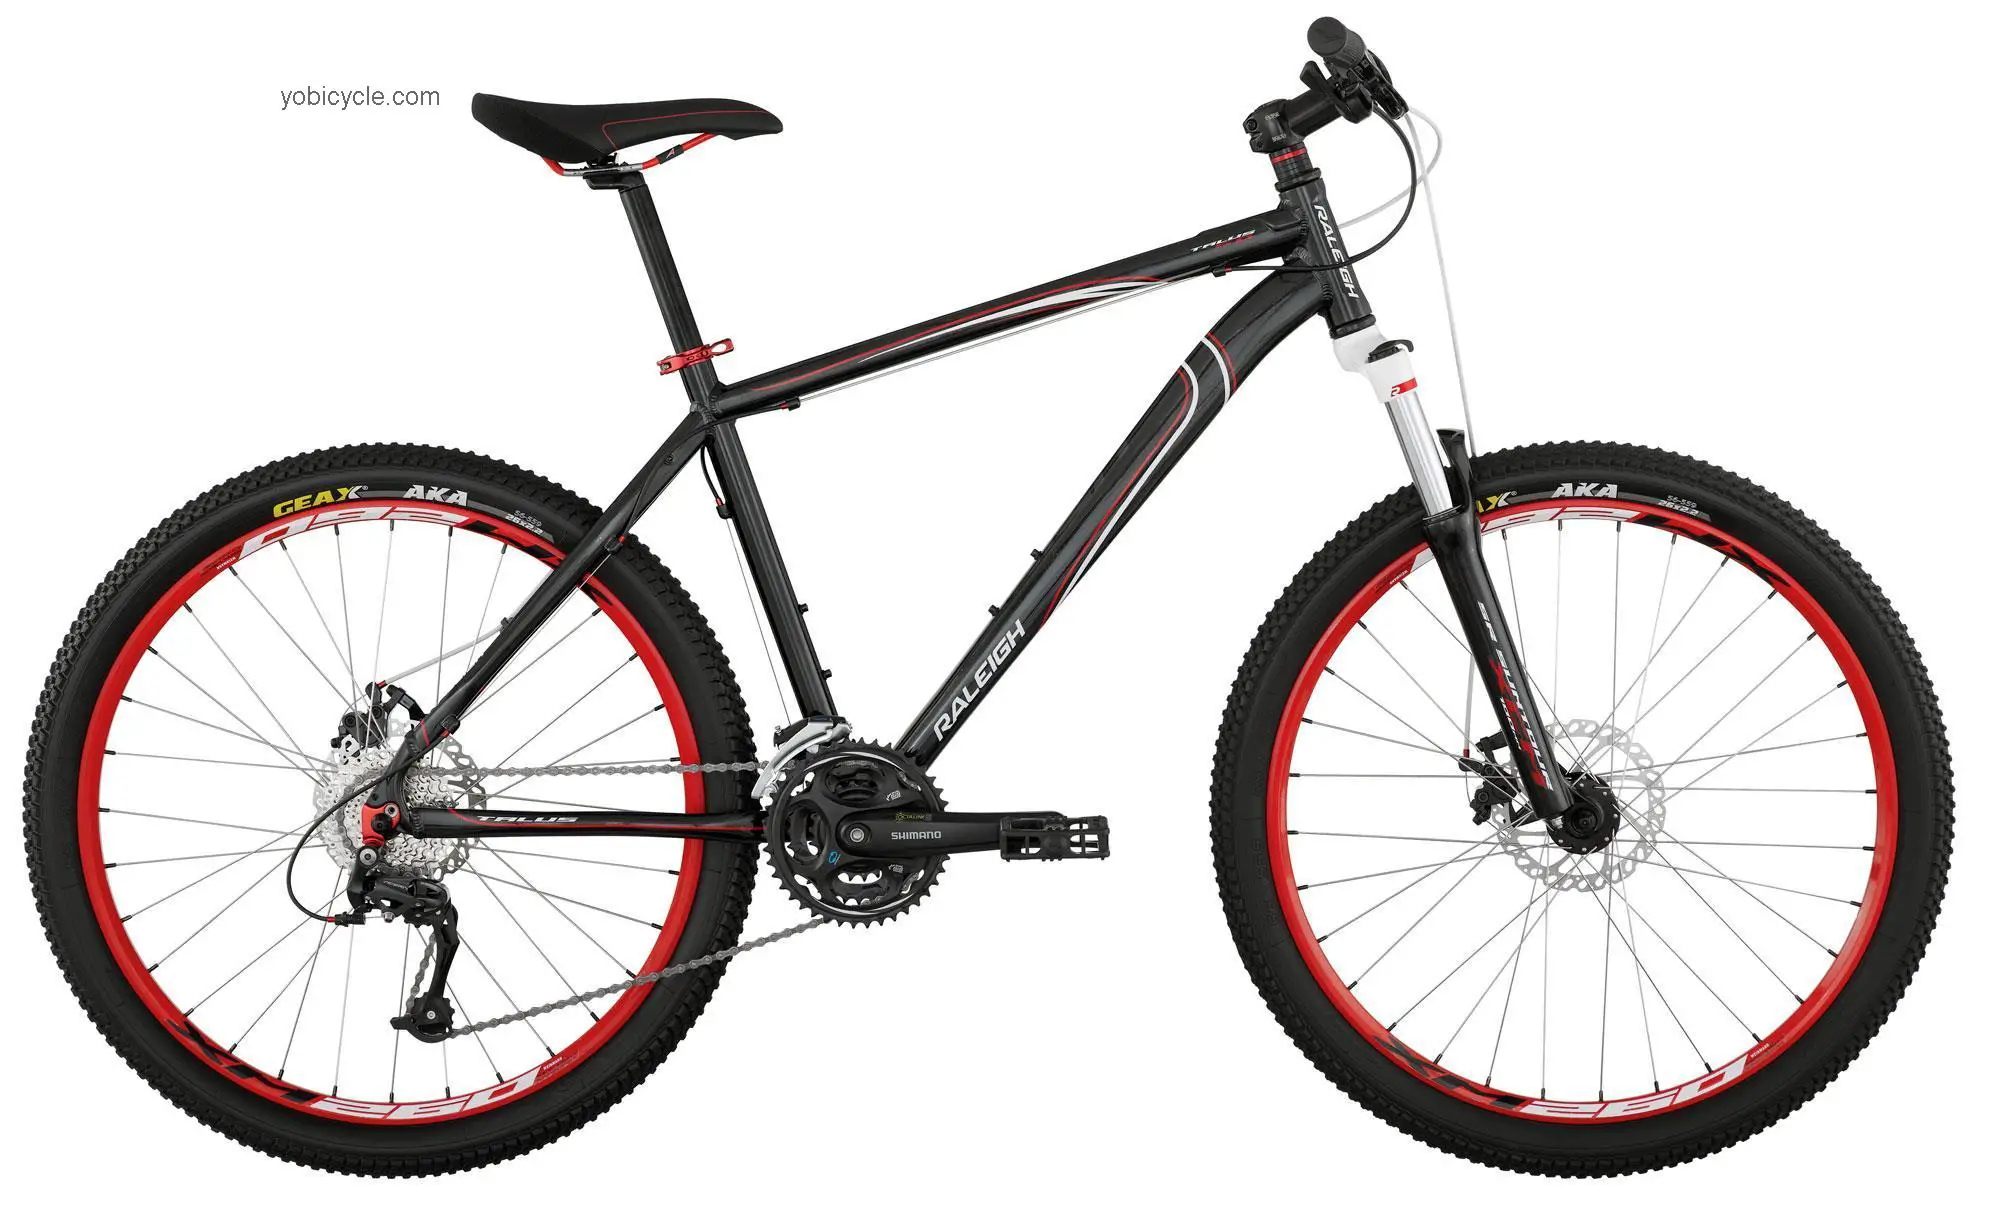 Raleigh Talus 5.0 2012 comparison online with competitors